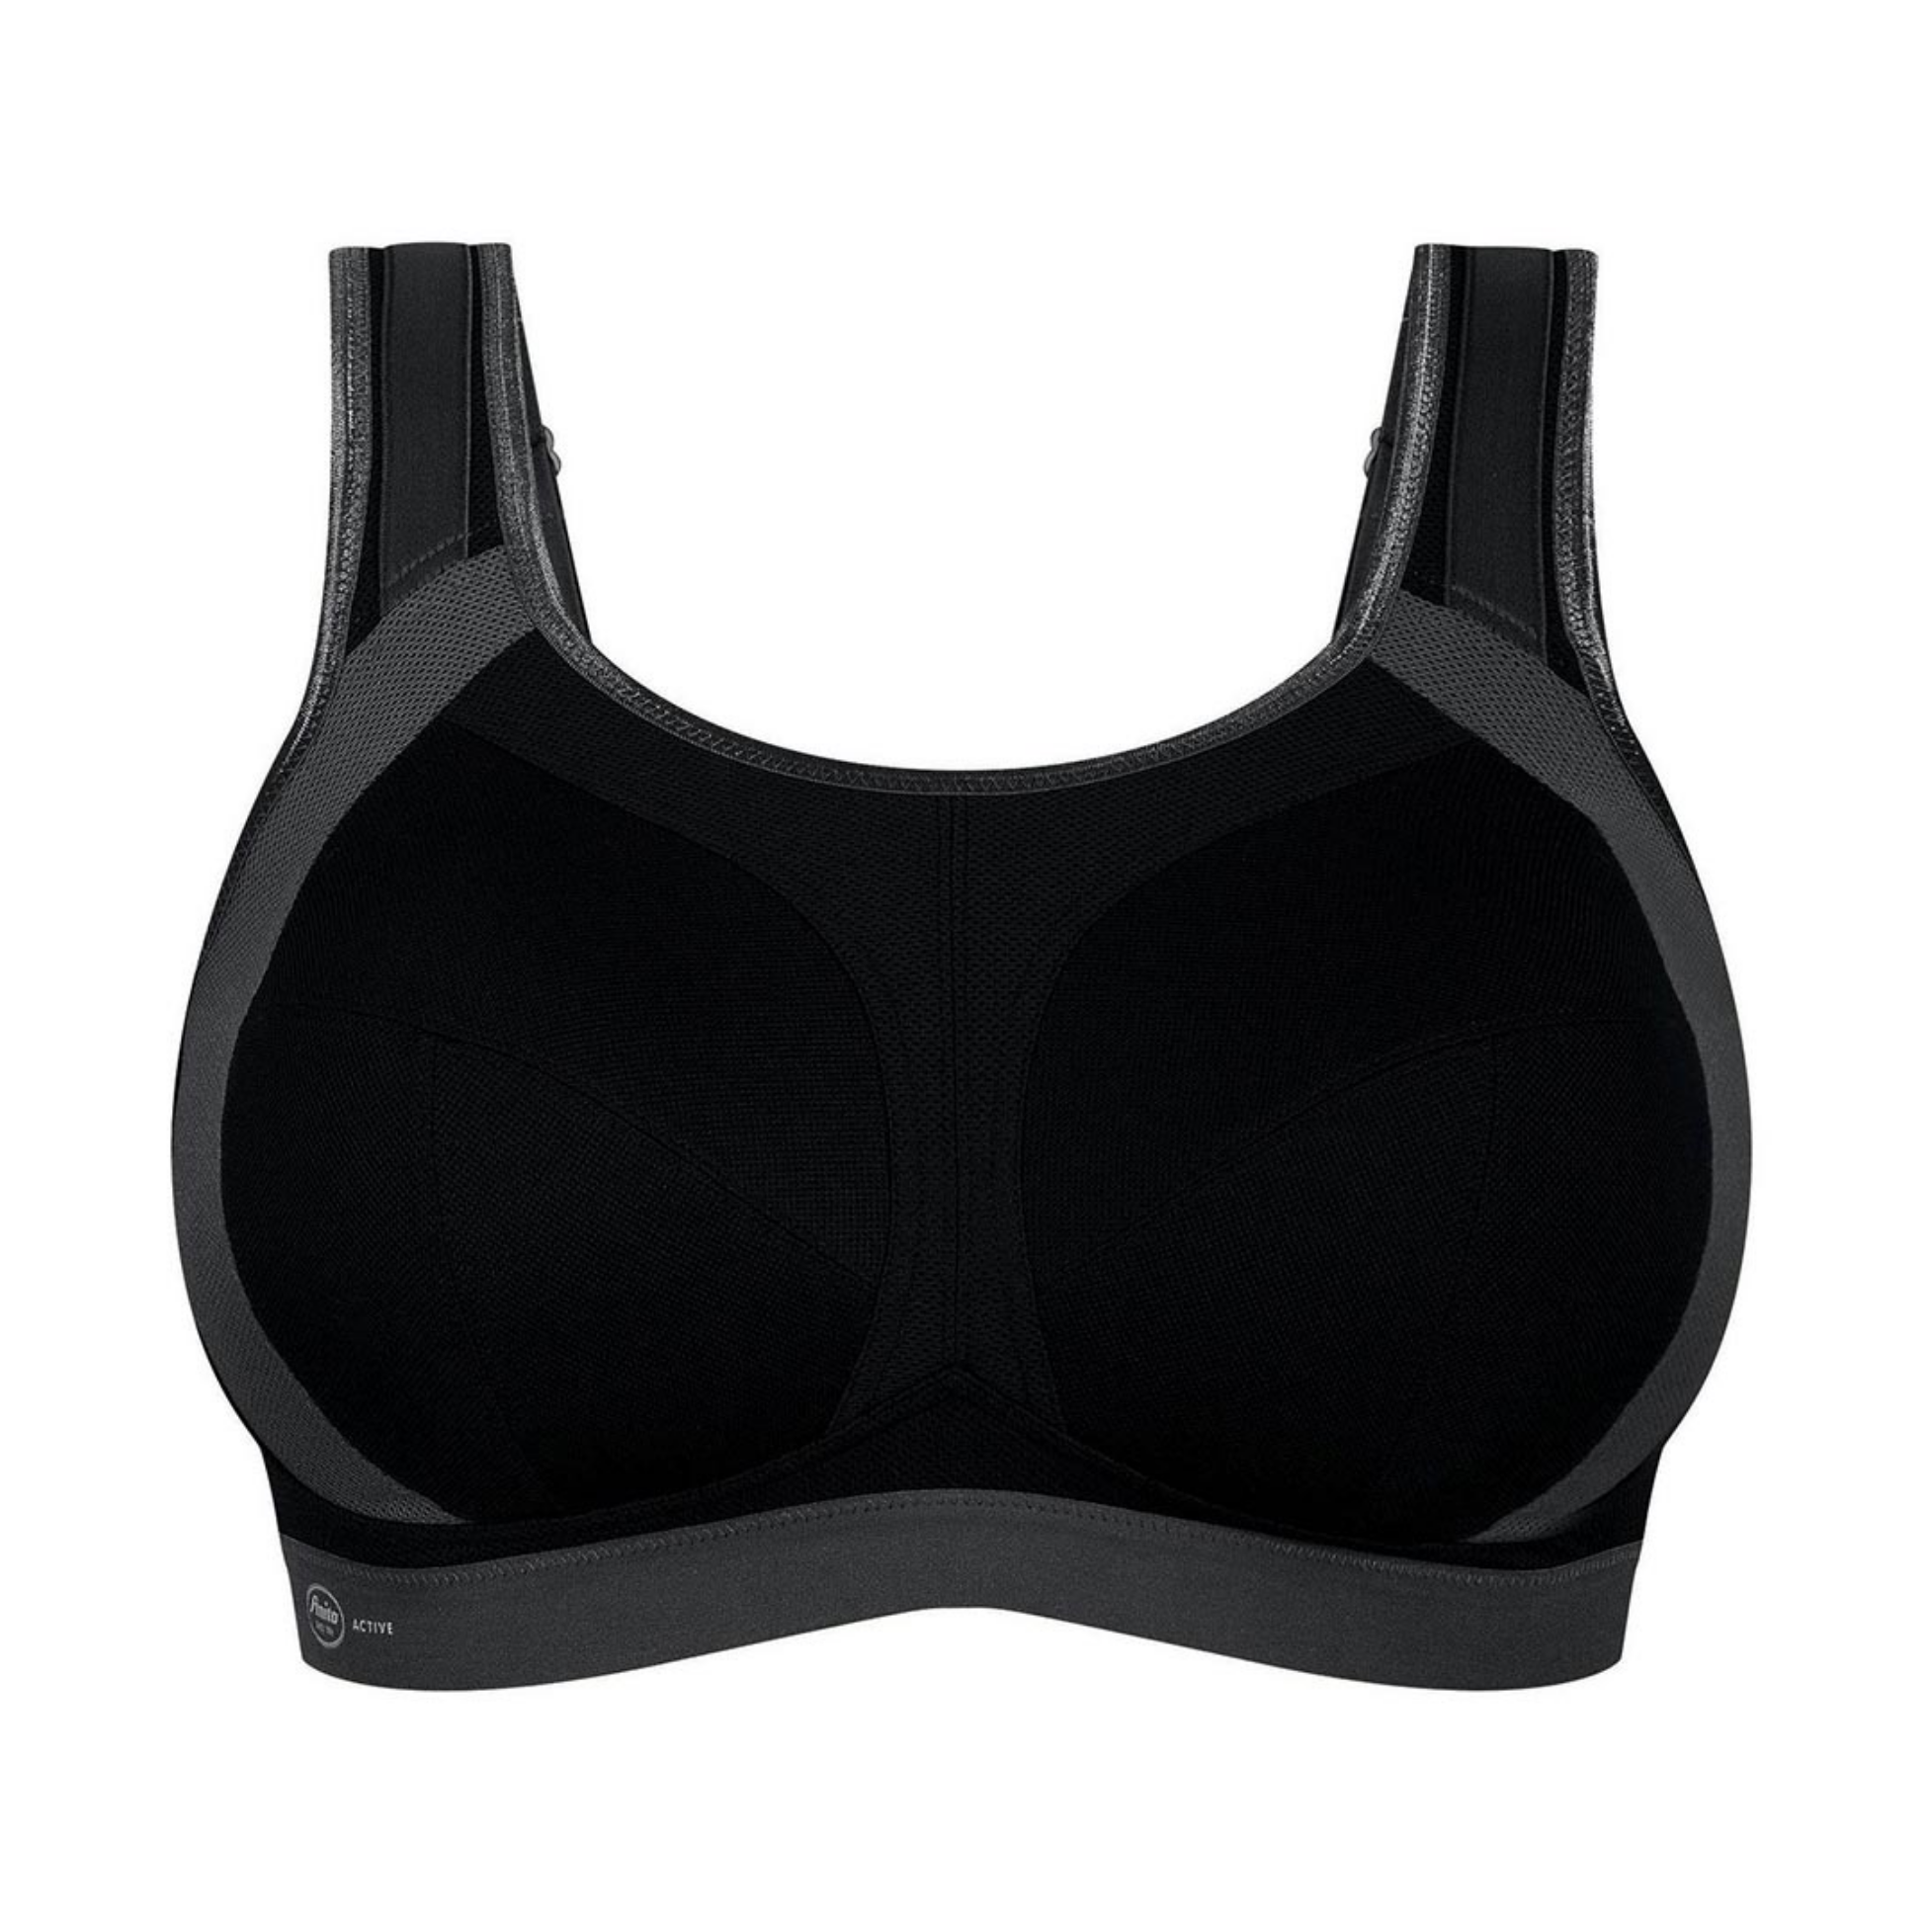 FashionNews 4 HOOKS CONTROL FULL COVERAGE BRA FOR WOMEN AND GIRLS